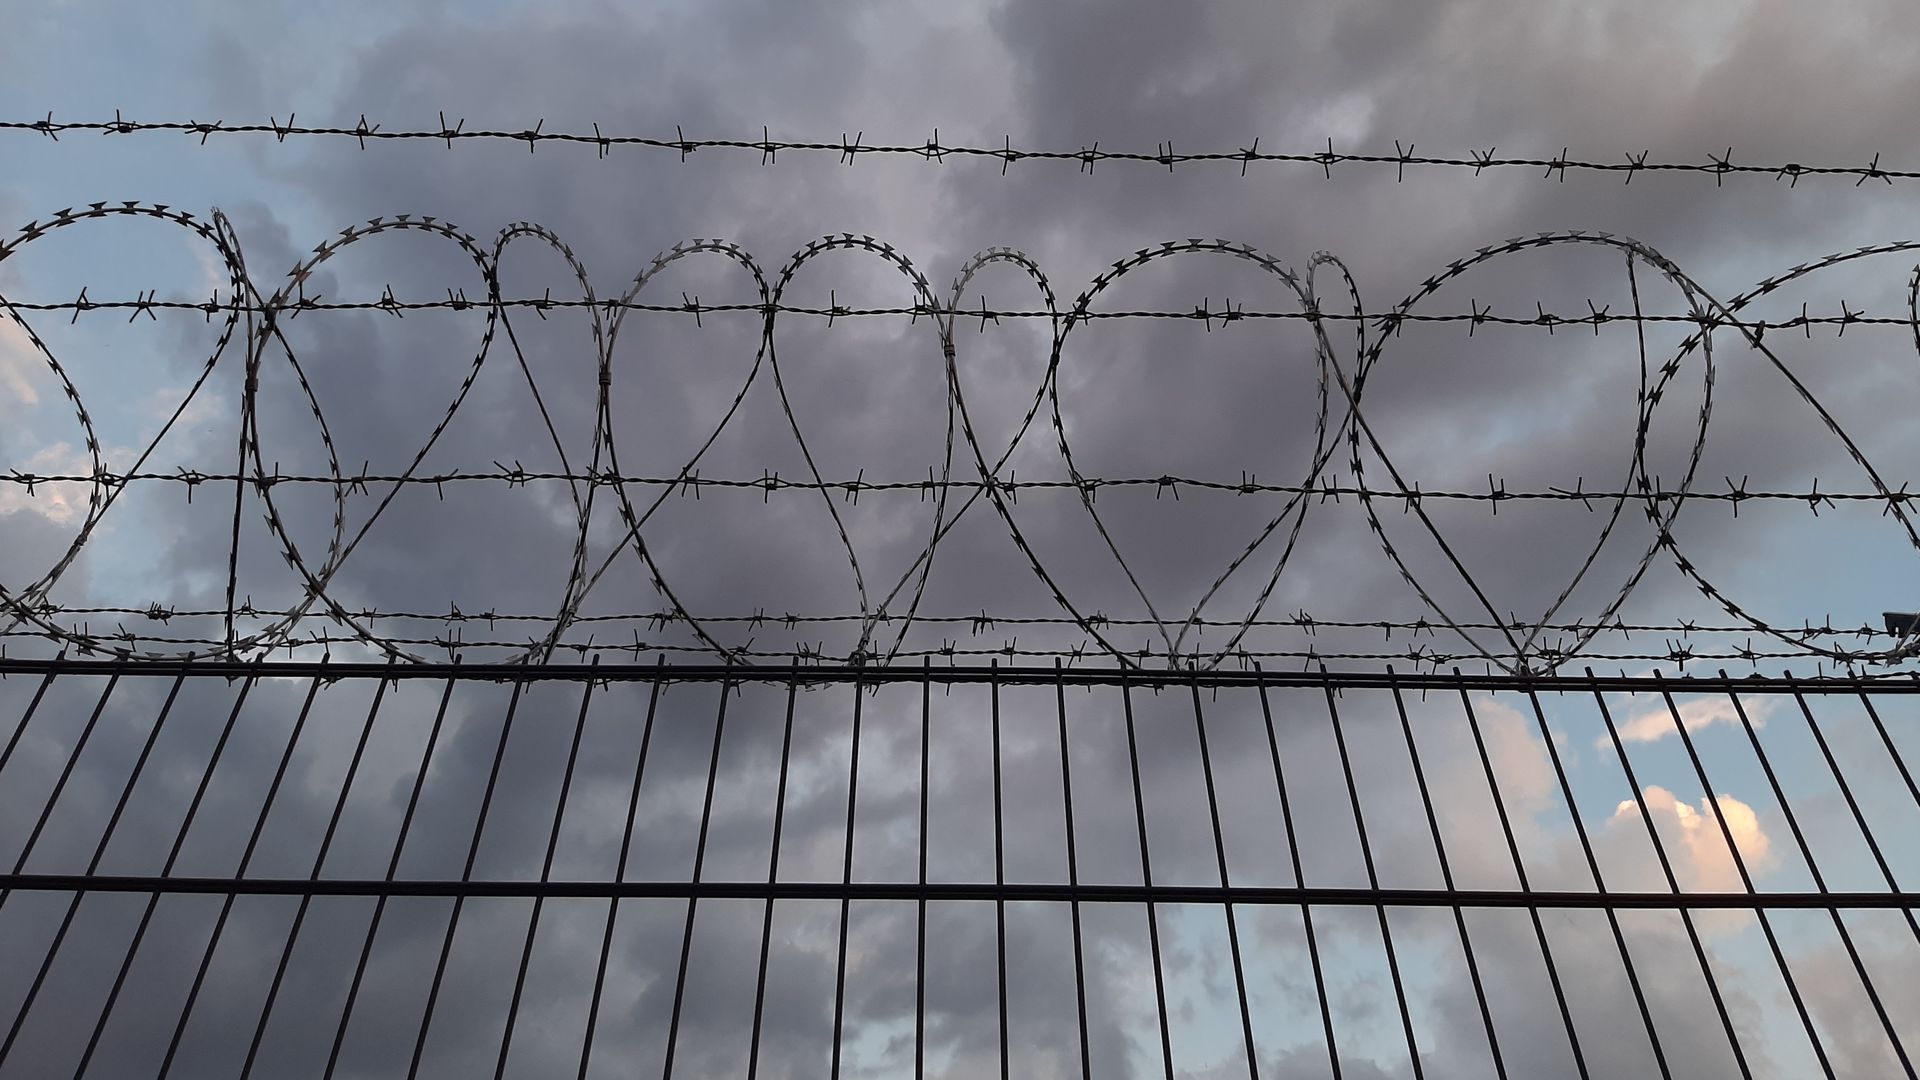 Photo of a jail fence with barbed wire.